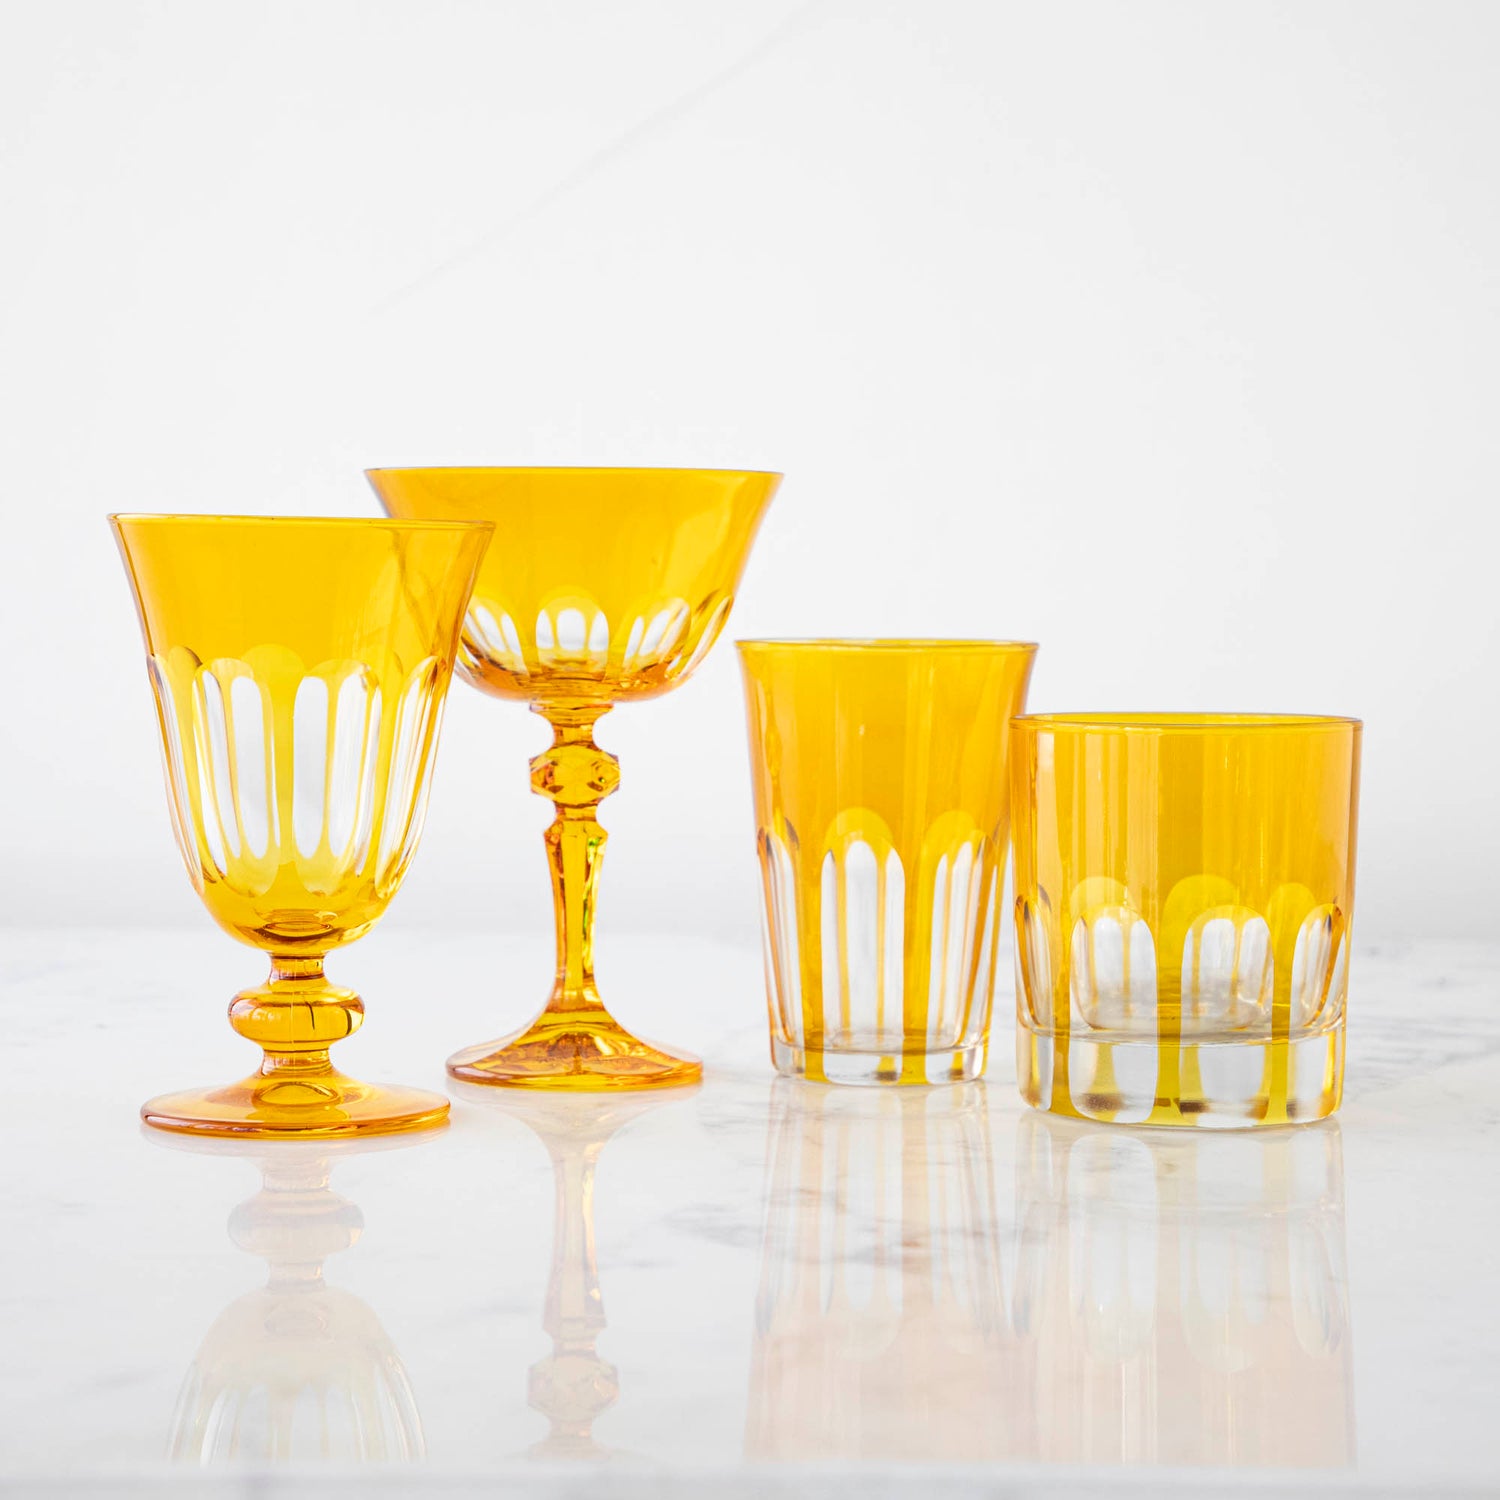 A set of Rialto Ginger (Dark Yellow) glasses from SIR/MADAM on a white surface, including two stemmed glasses and two tumblers with a vertical line pattern.